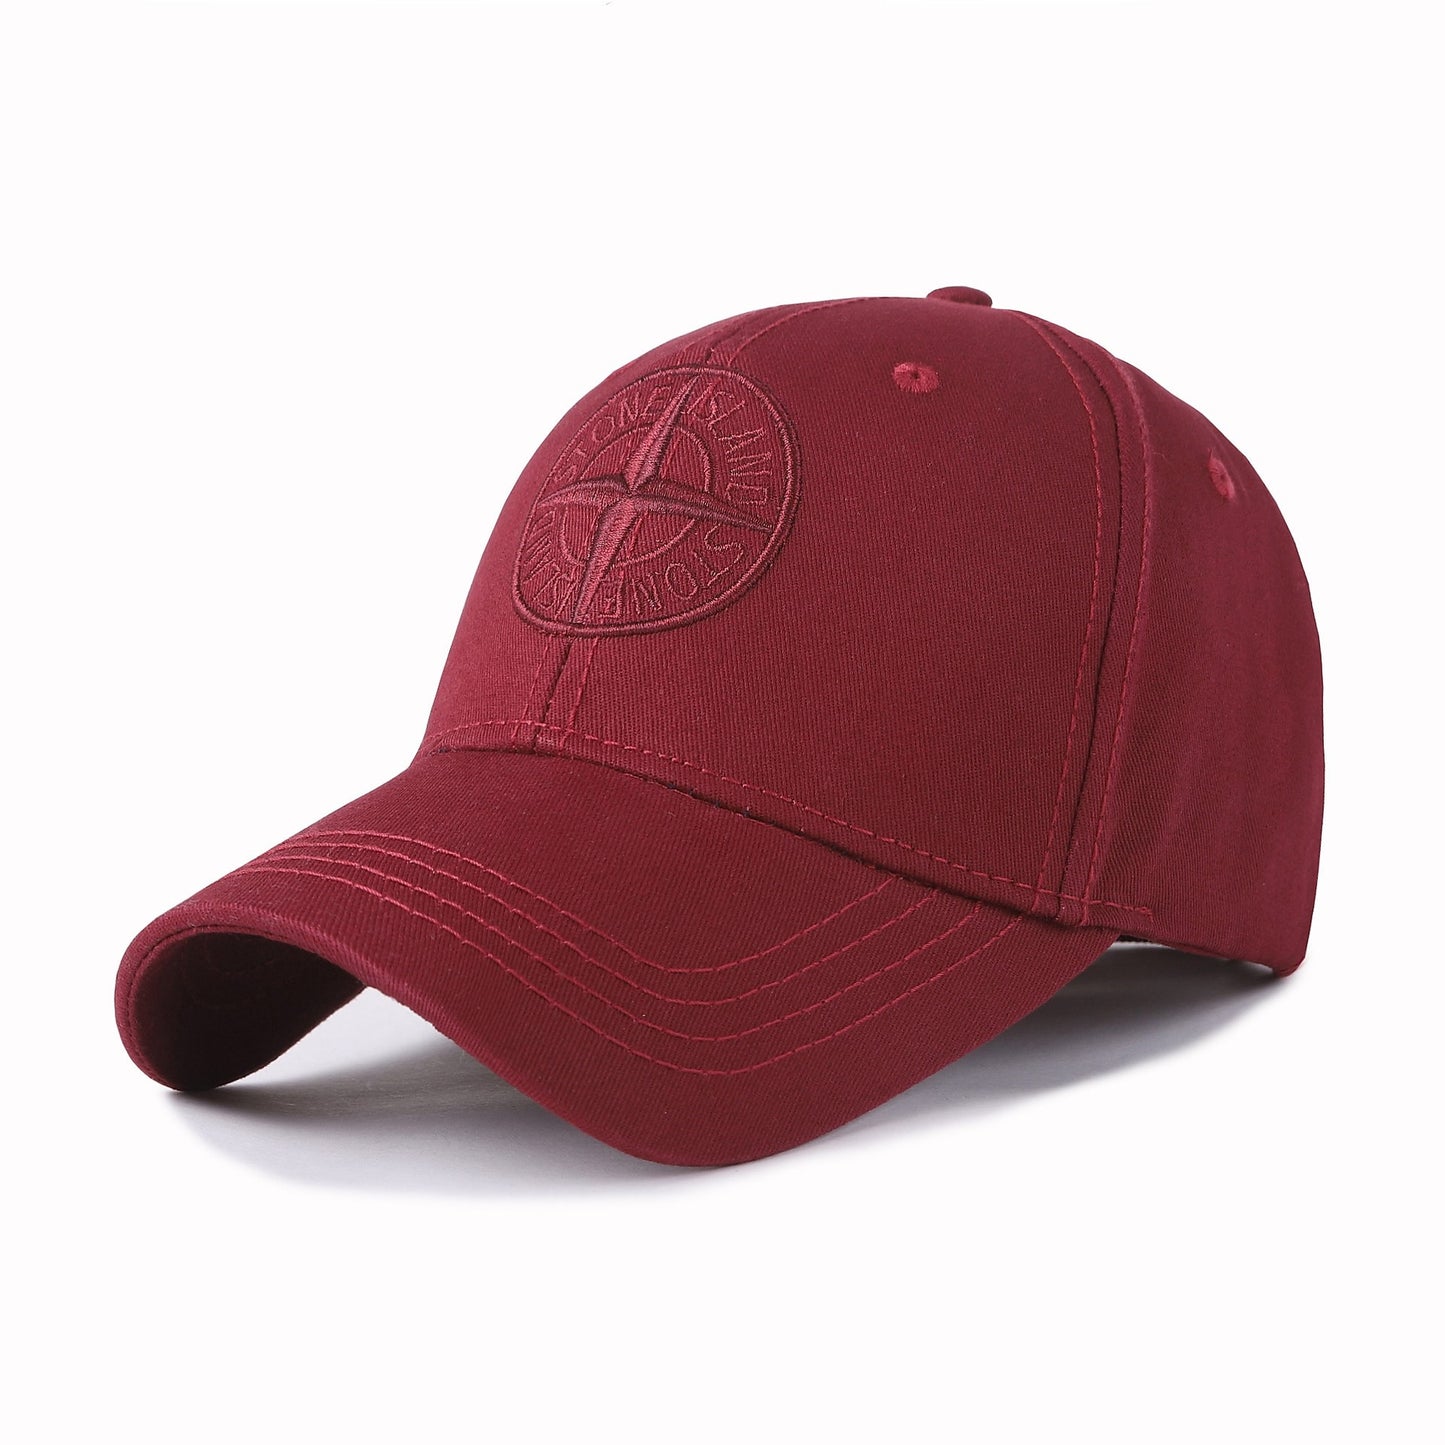 Casual cross-embroidered peaked cap